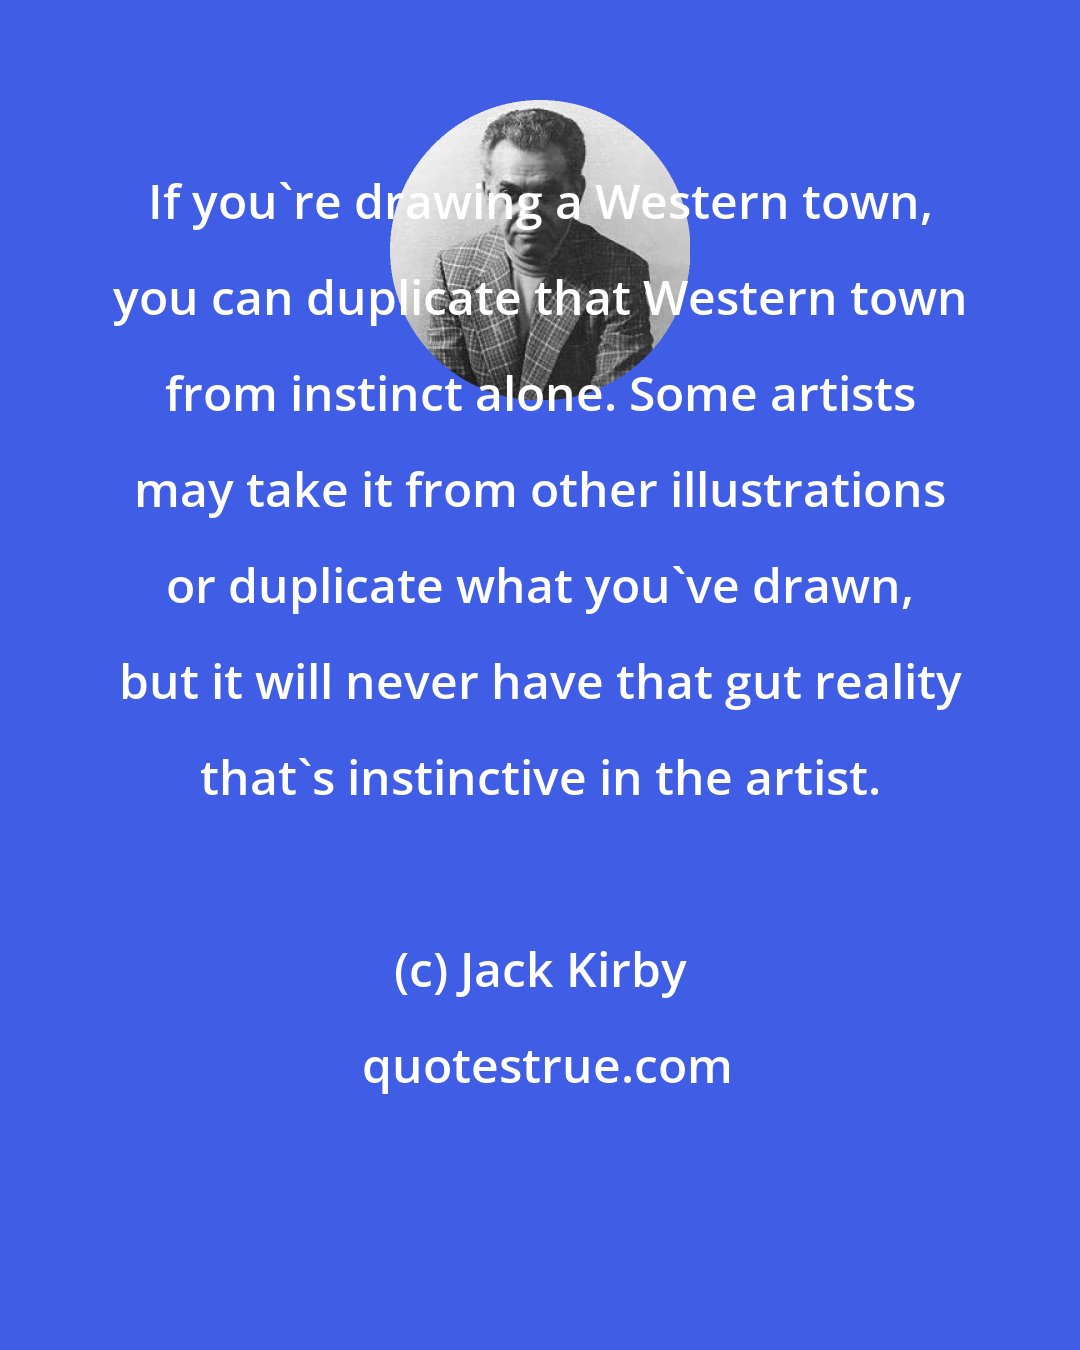 Jack Kirby: If you're drawing a Western town, you can duplicate that Western town from instinct alone. Some artists may take it from other illustrations or duplicate what you've drawn, but it will never have that gut reality that's instinctive in the artist.